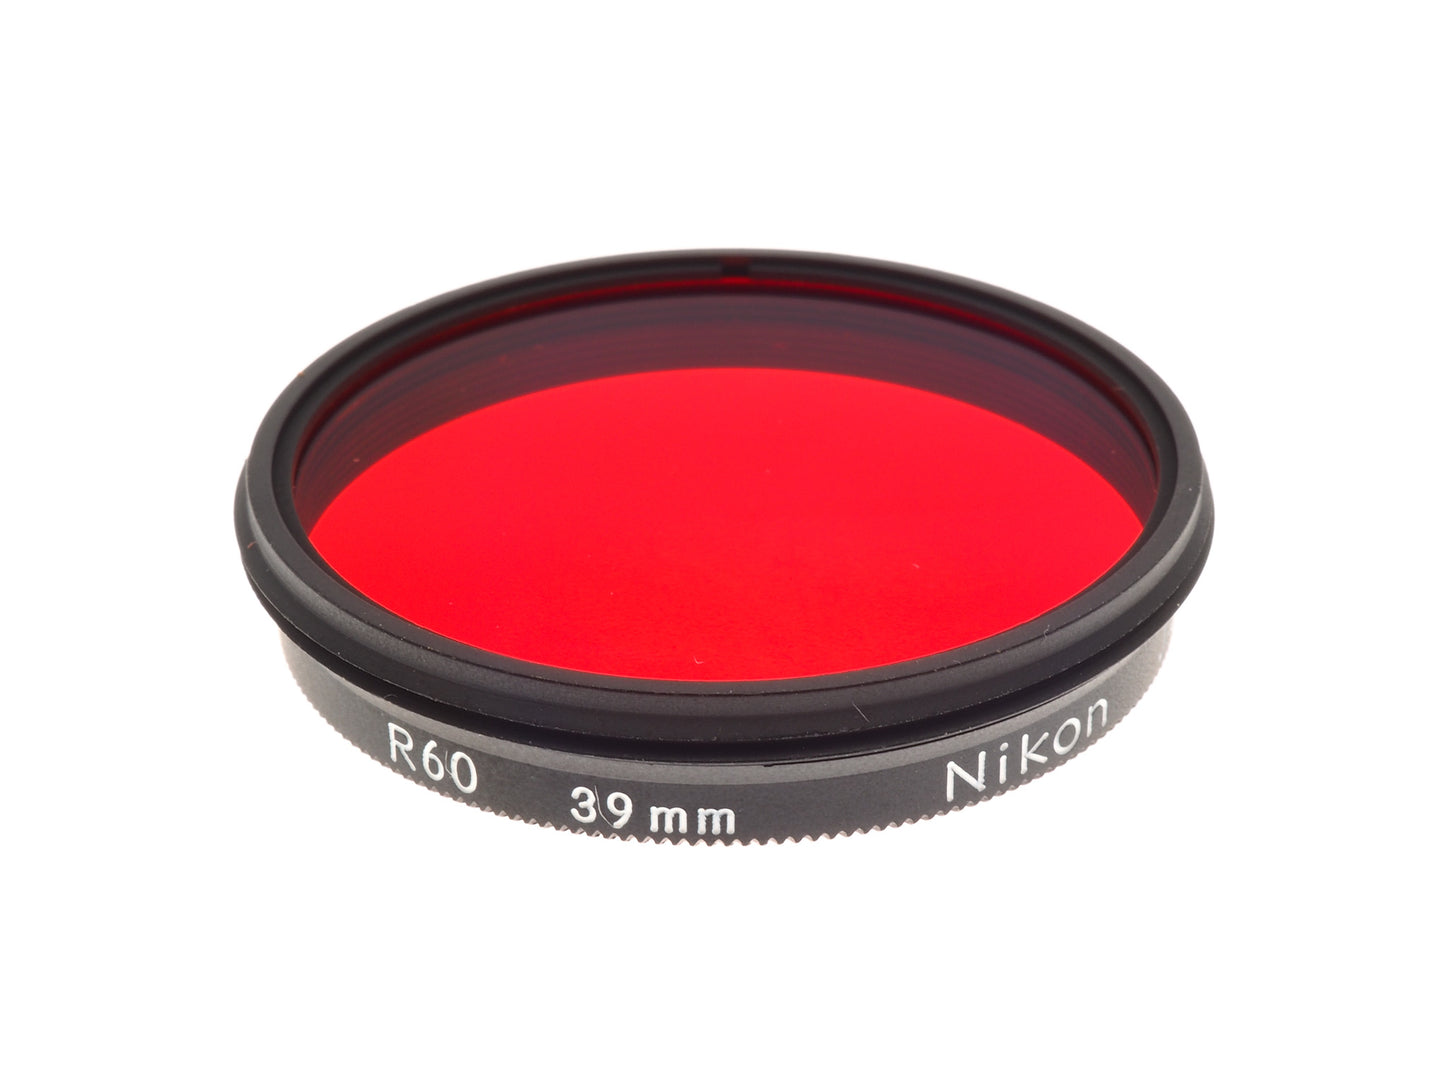 Nikon 39mm Red Filter R60 - Accessory